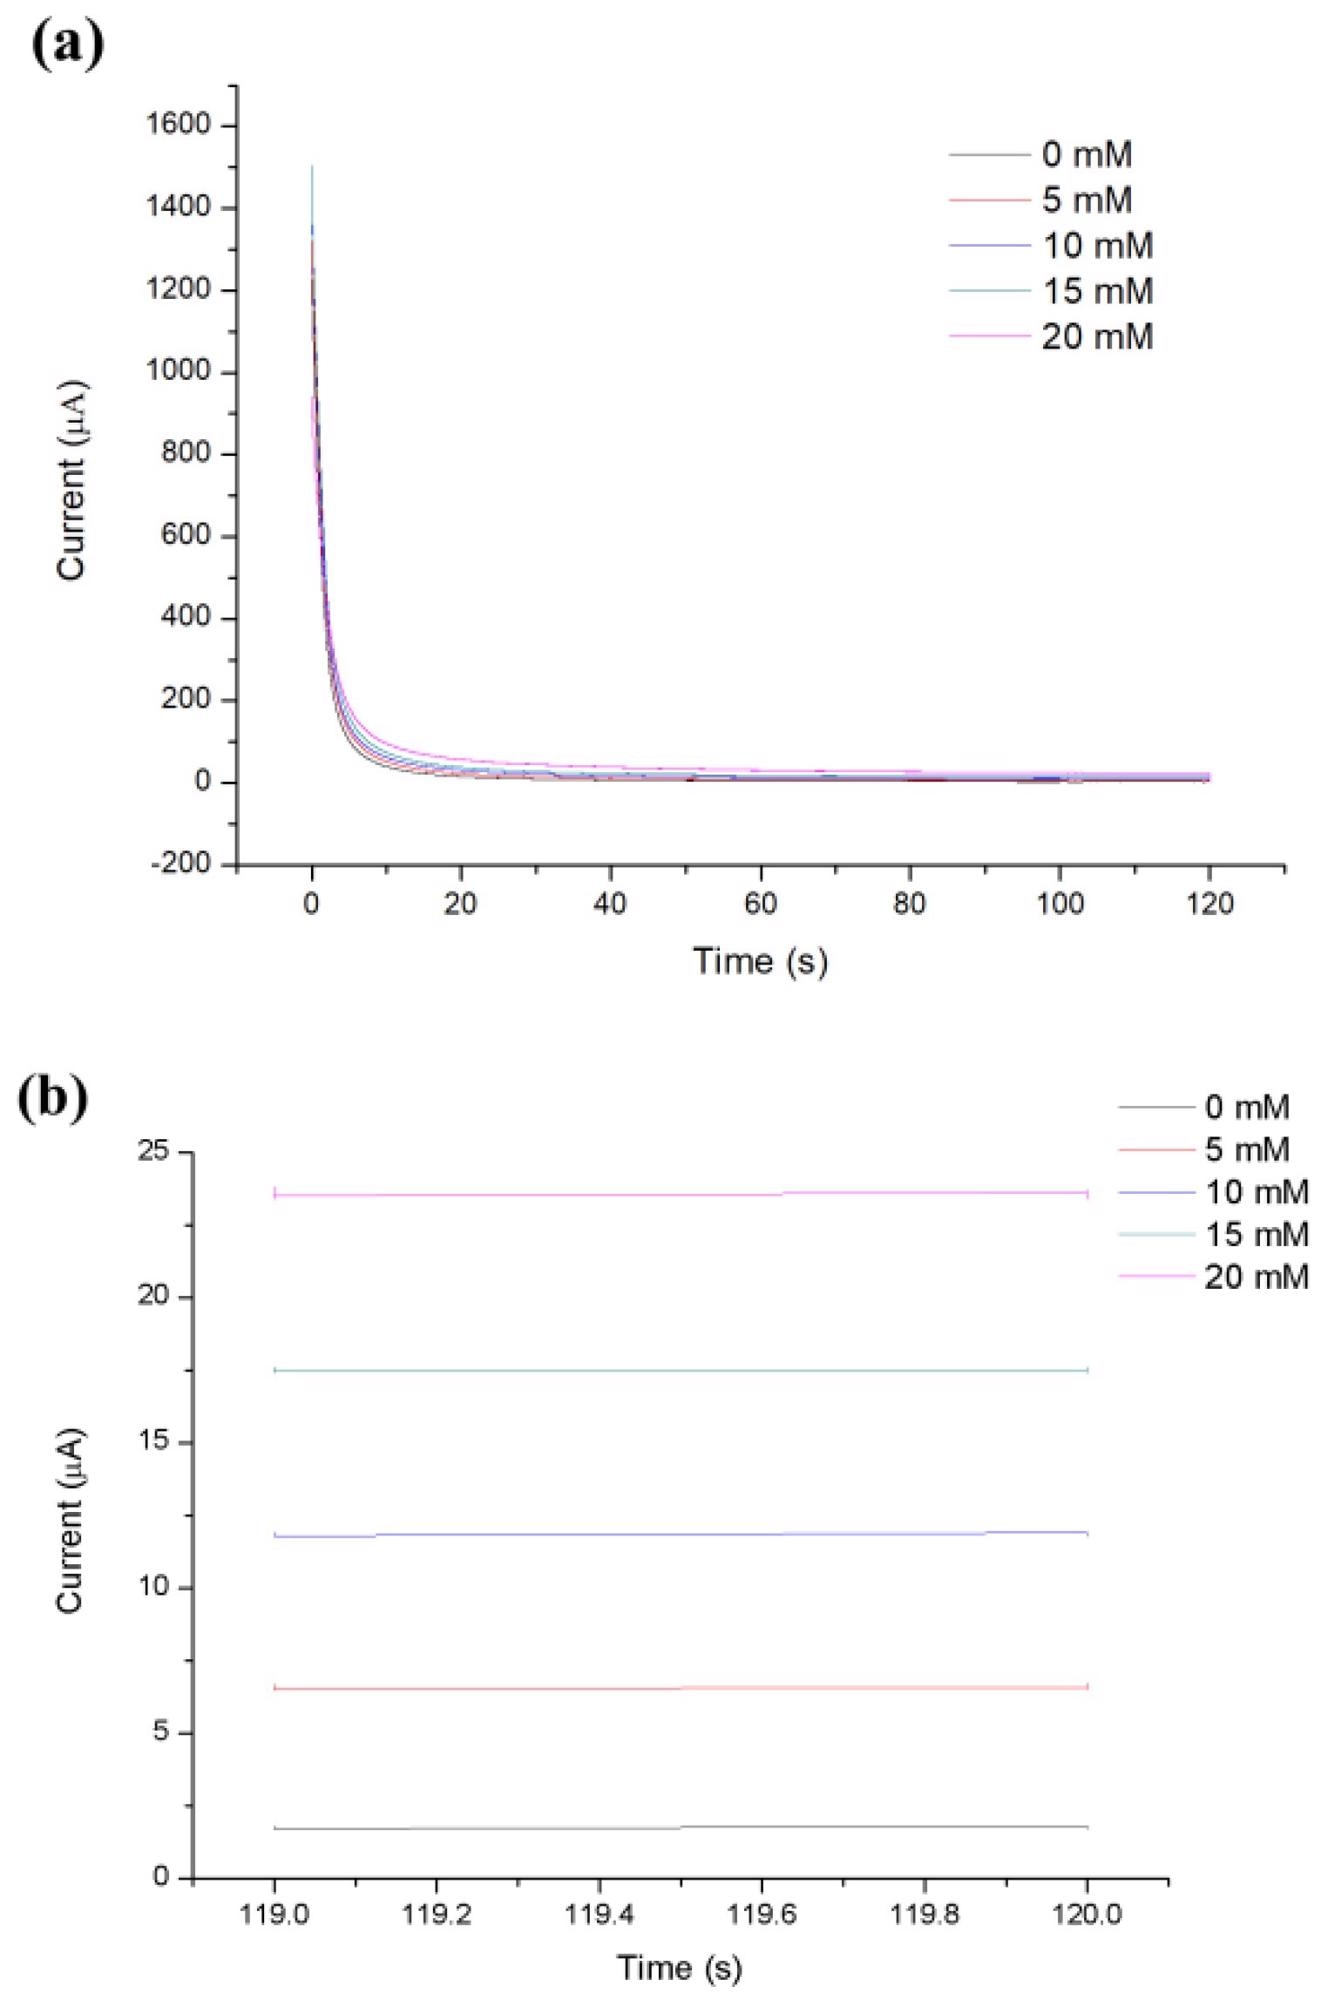 (a) Representative CA current curves measured at different concentrations. (b) The zoomed-in views of the CA current curves in (a) from 119 to 120s.